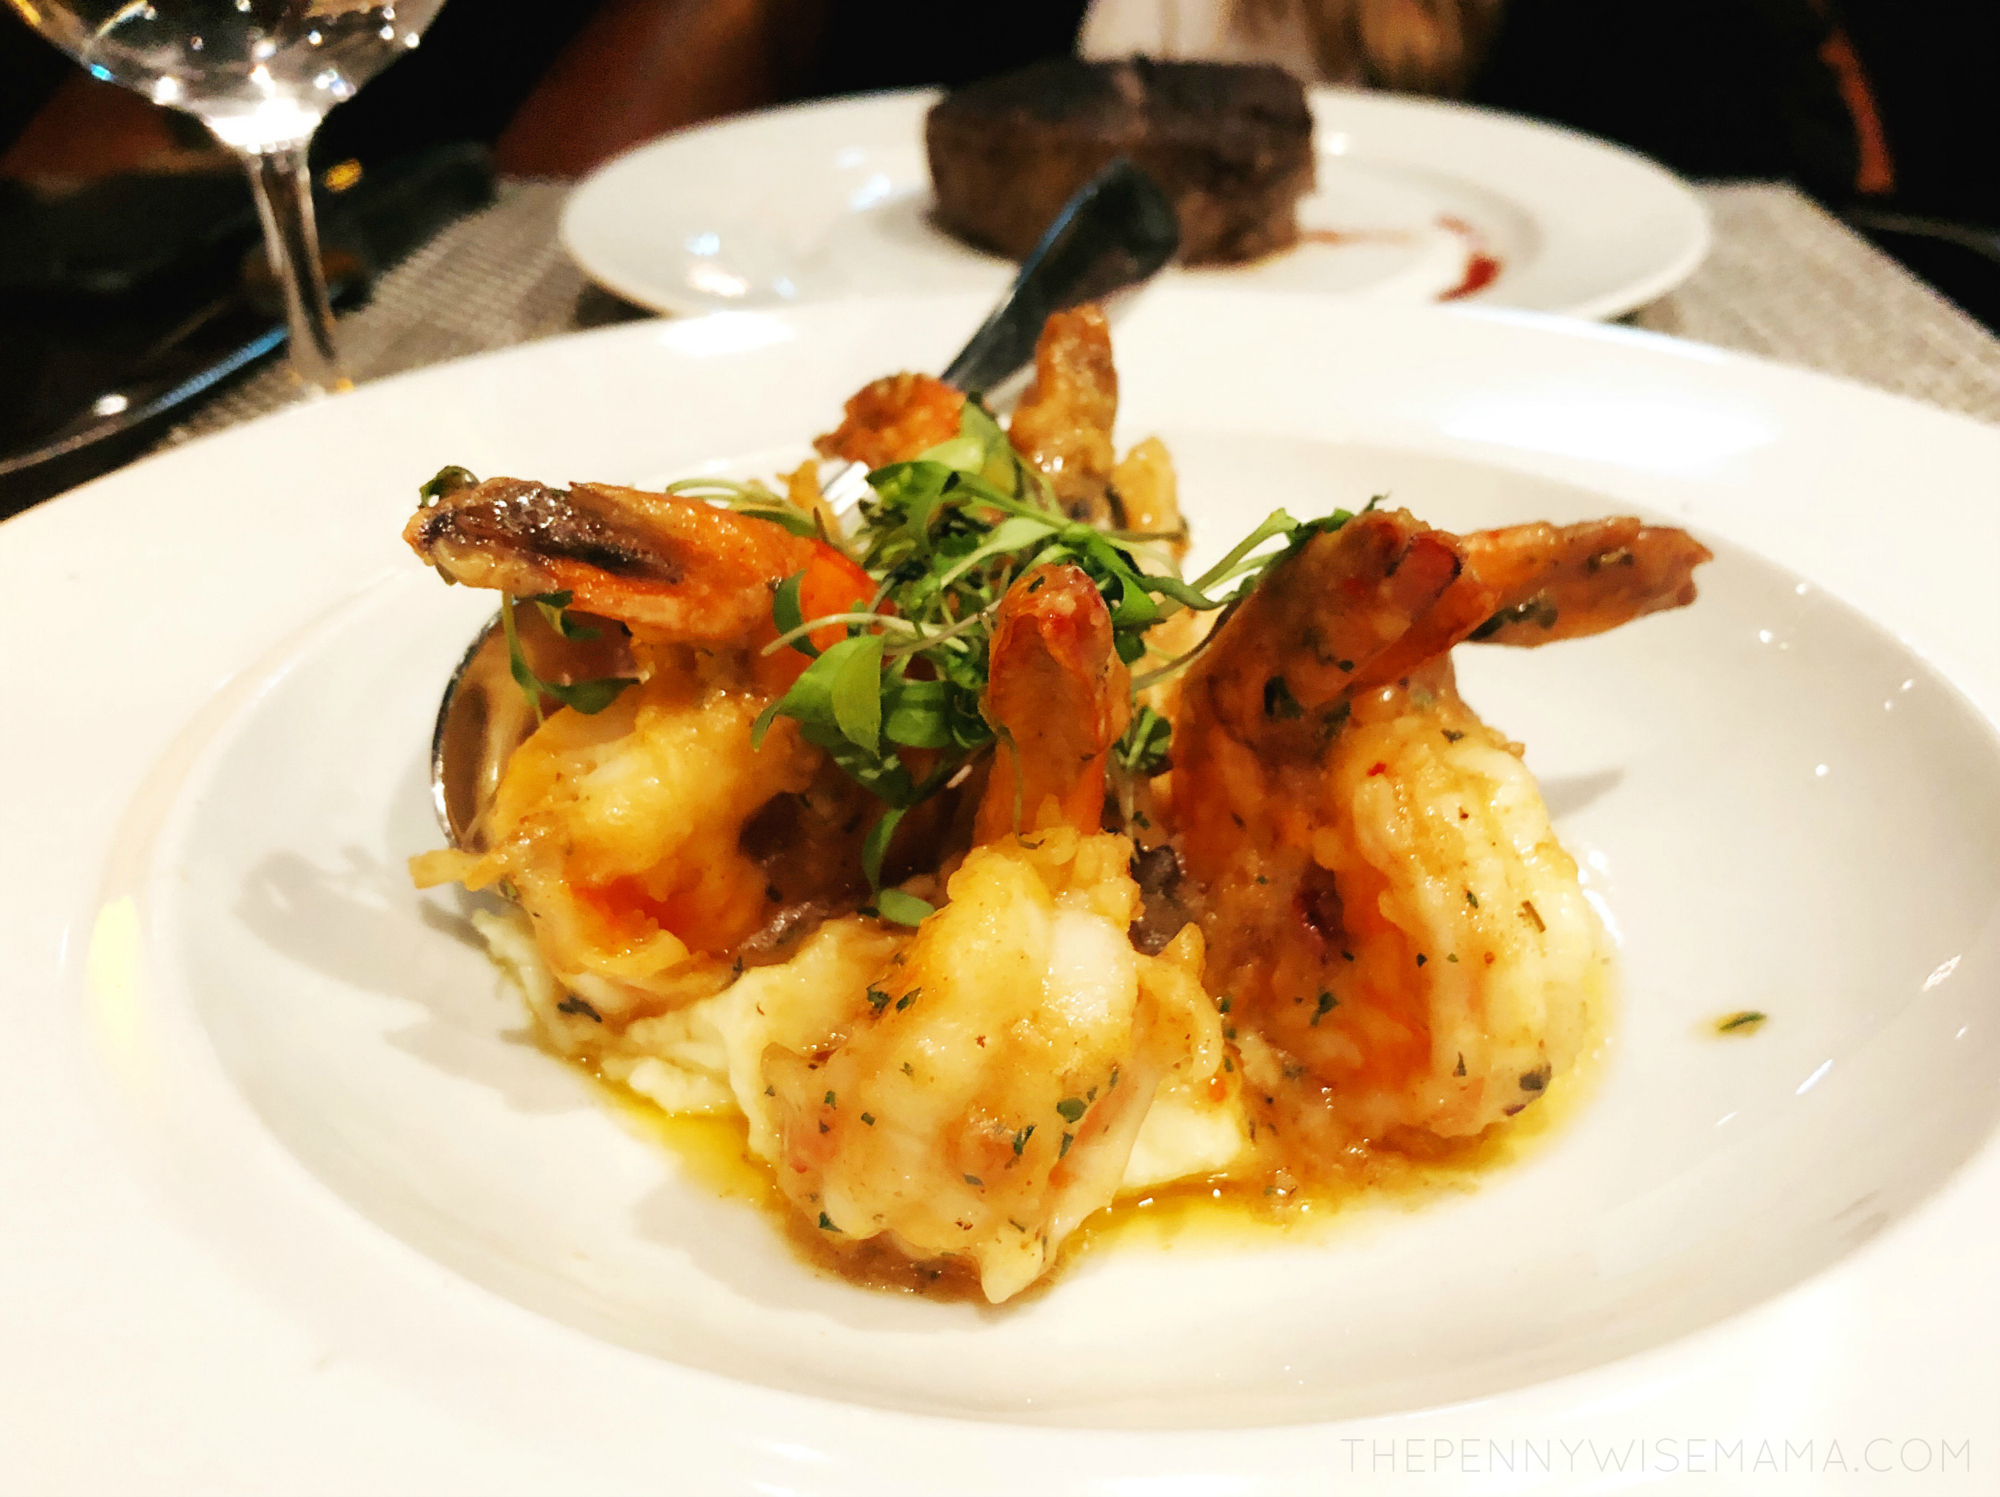 Royal Caribbean Symphony of the Seas - Chops Grille - Spicy Shrimp